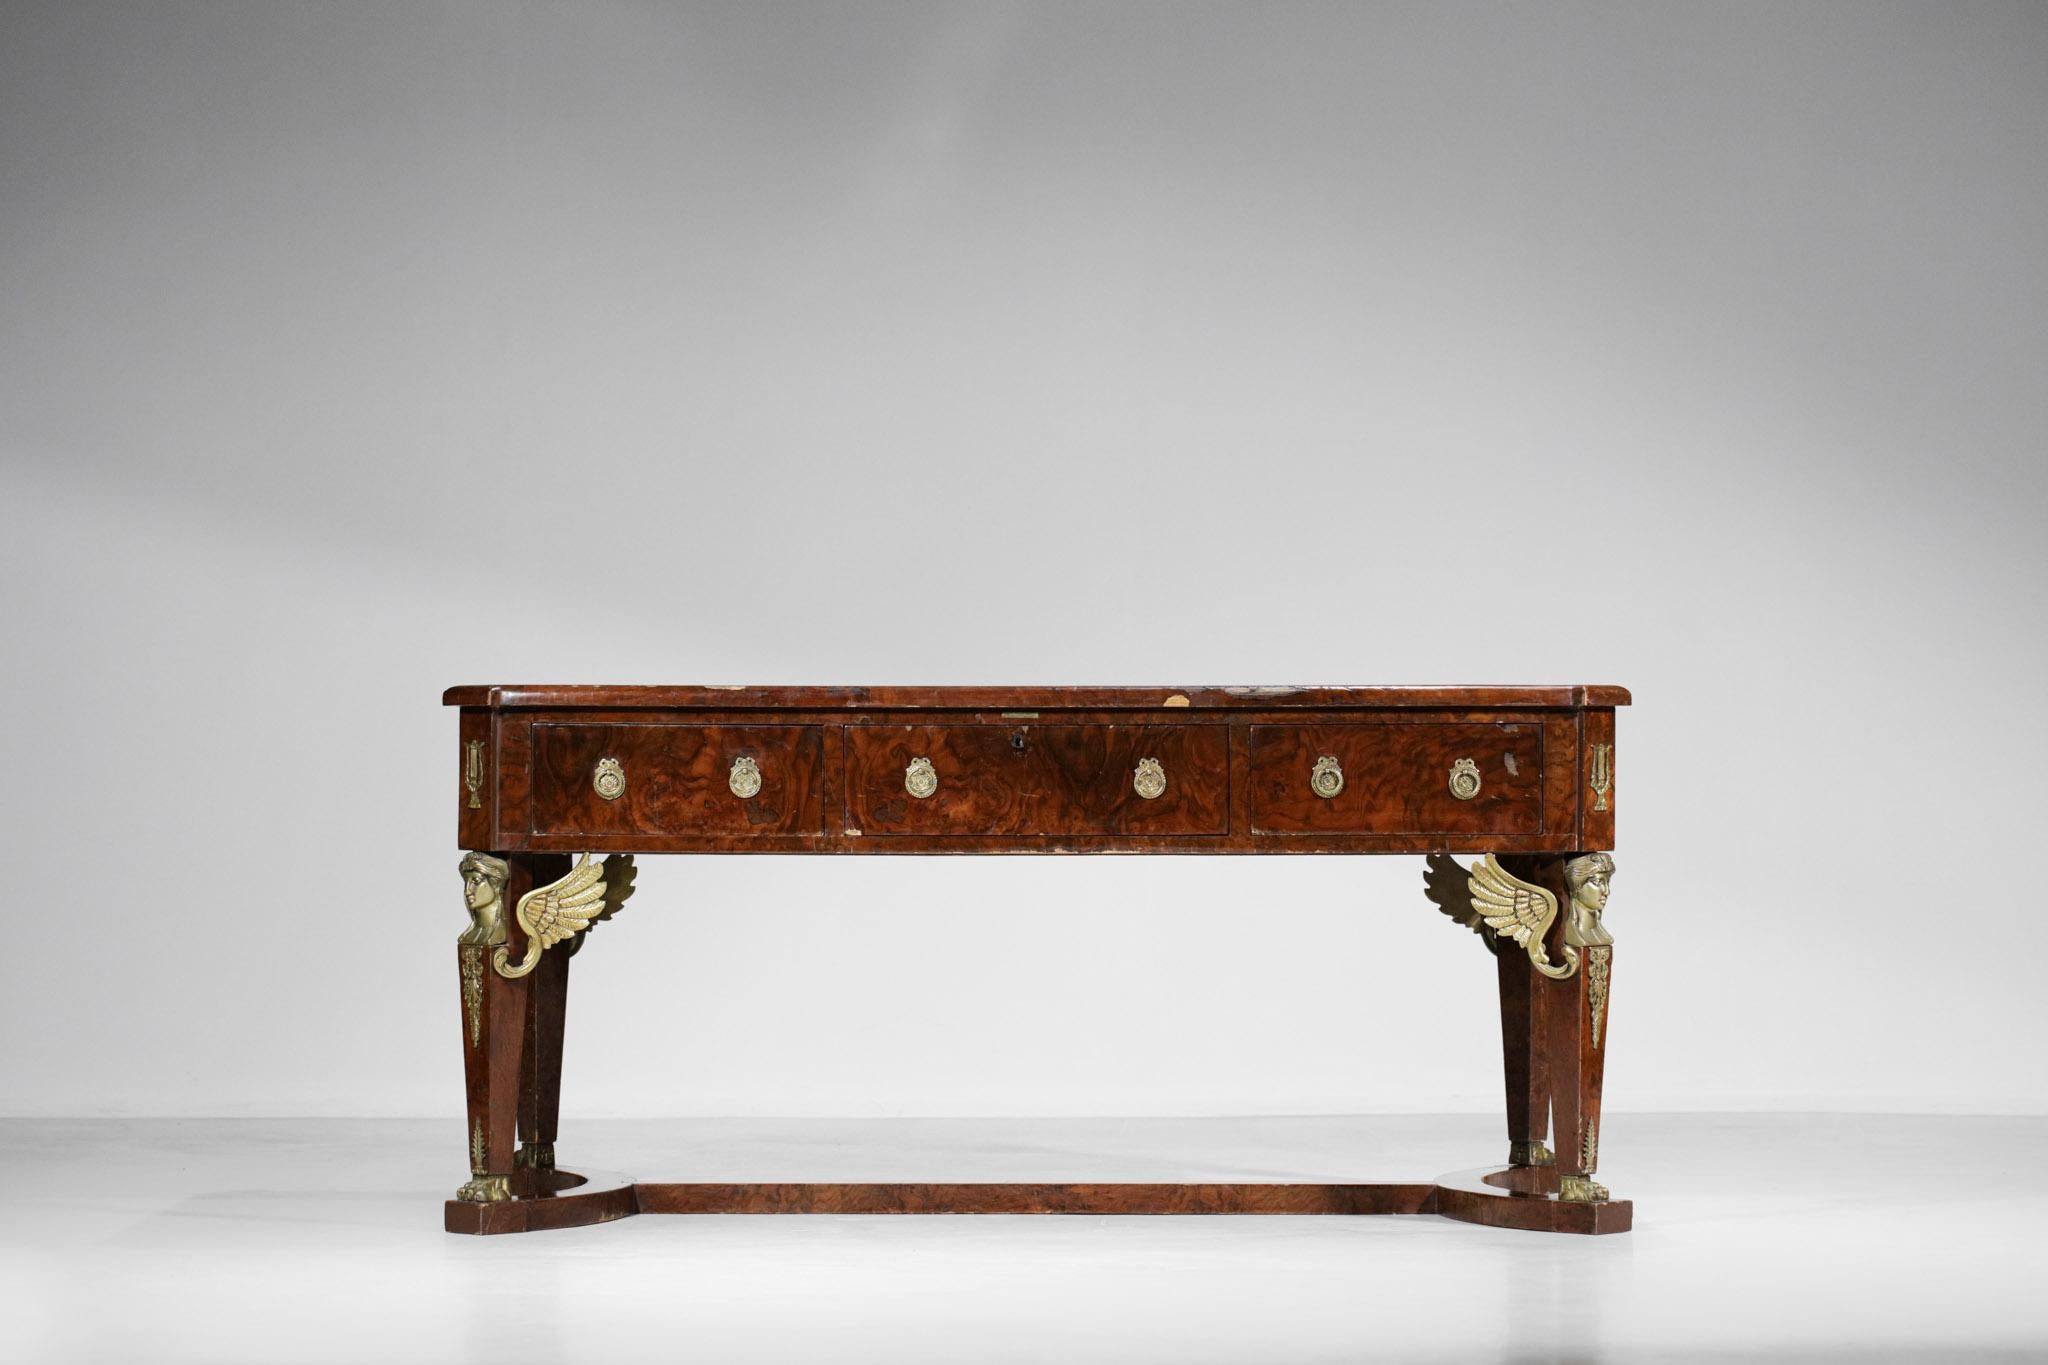 Very decorative French desk in the empire style. Structure in solid mahogany and veneered, it is composed of an empire green leather under hand, three drawers with double handles and decorated with many gilded bronze elements typical of the empire